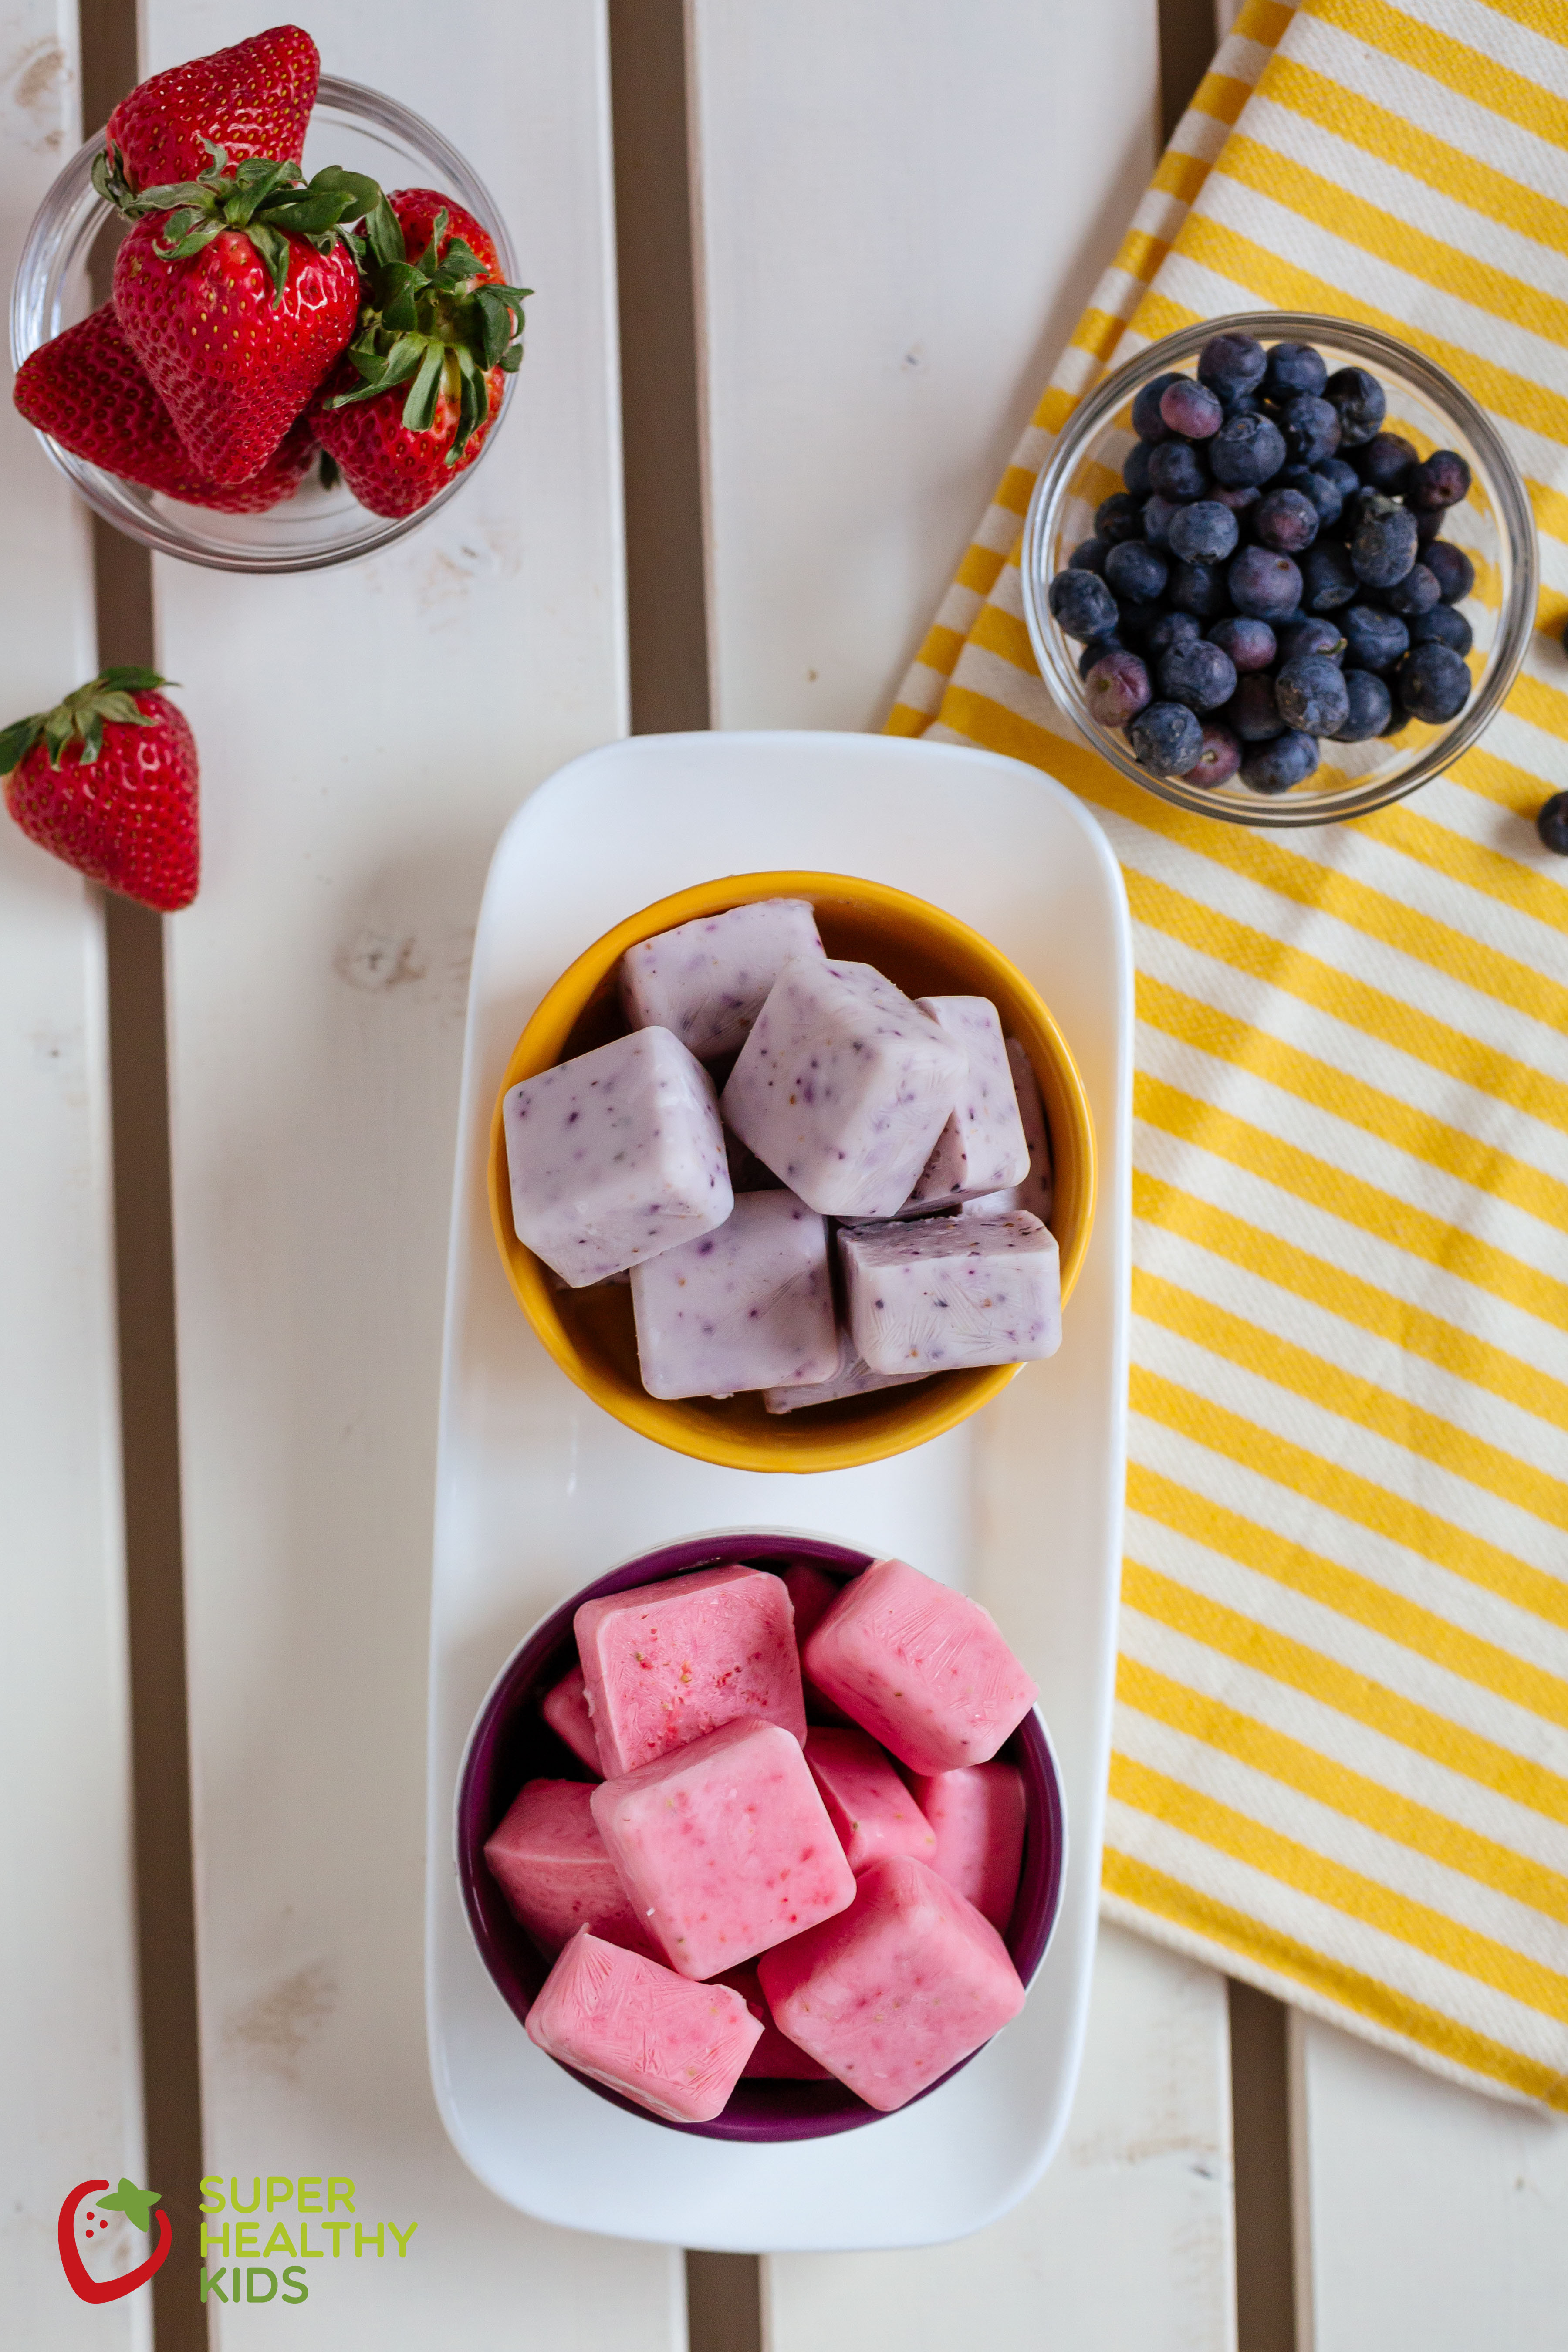 Healthy Snacks For Kids To Make
 FroYo Bites Recipe